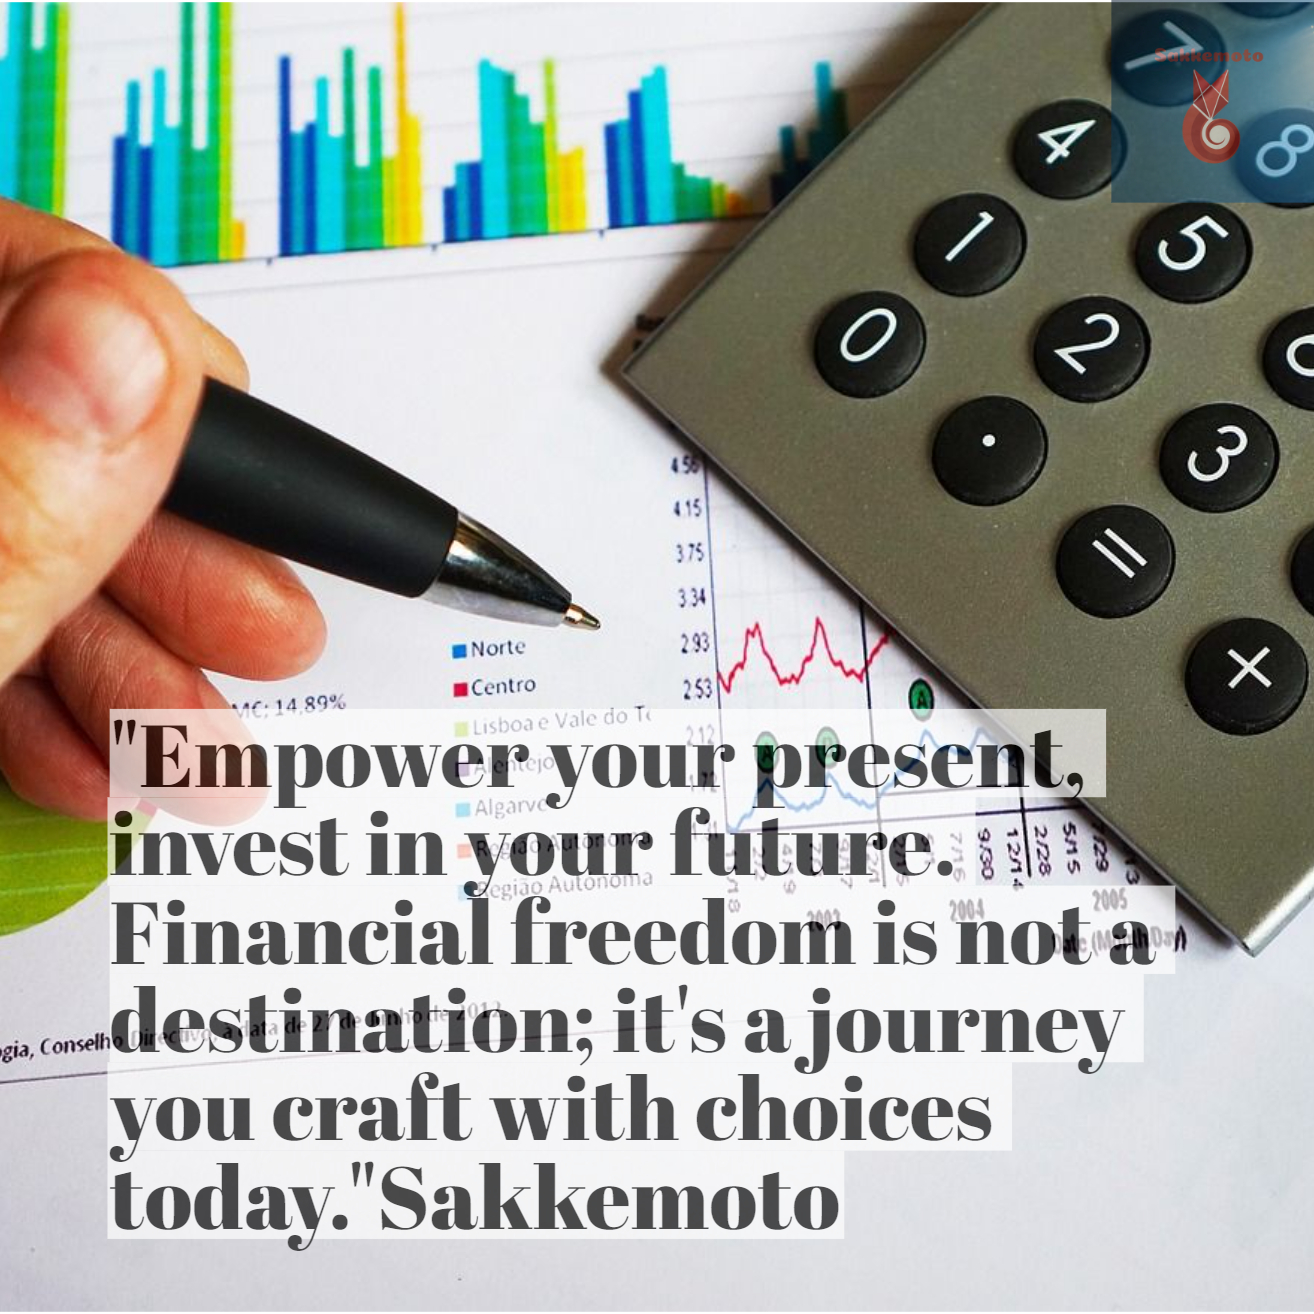 quote of financial freedom on sakkemoto.